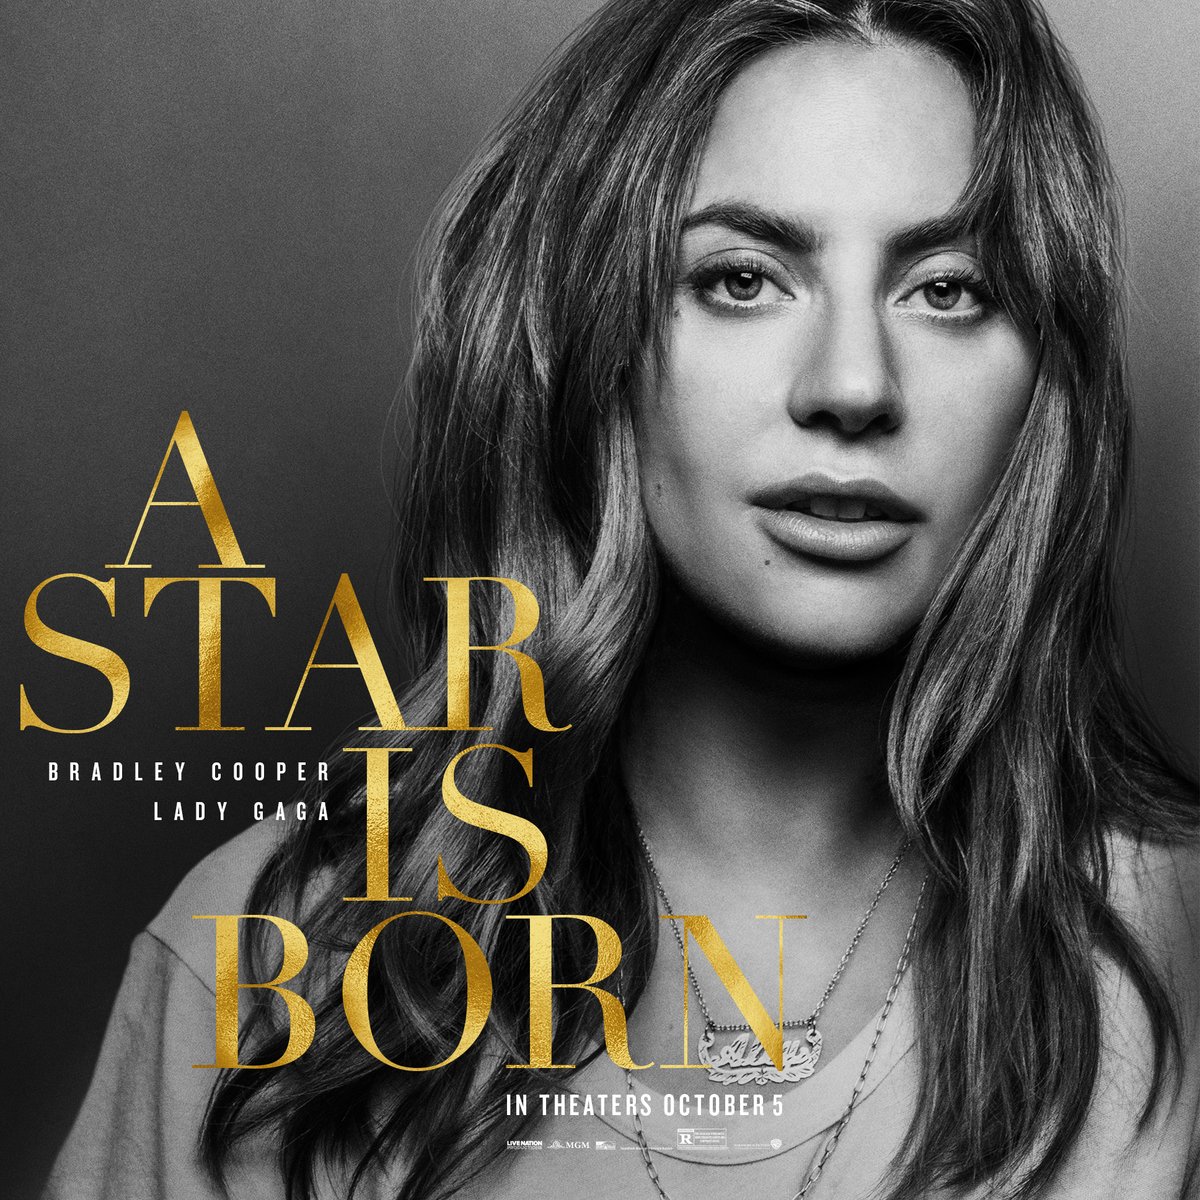 Lady gaga A star is born torrents download